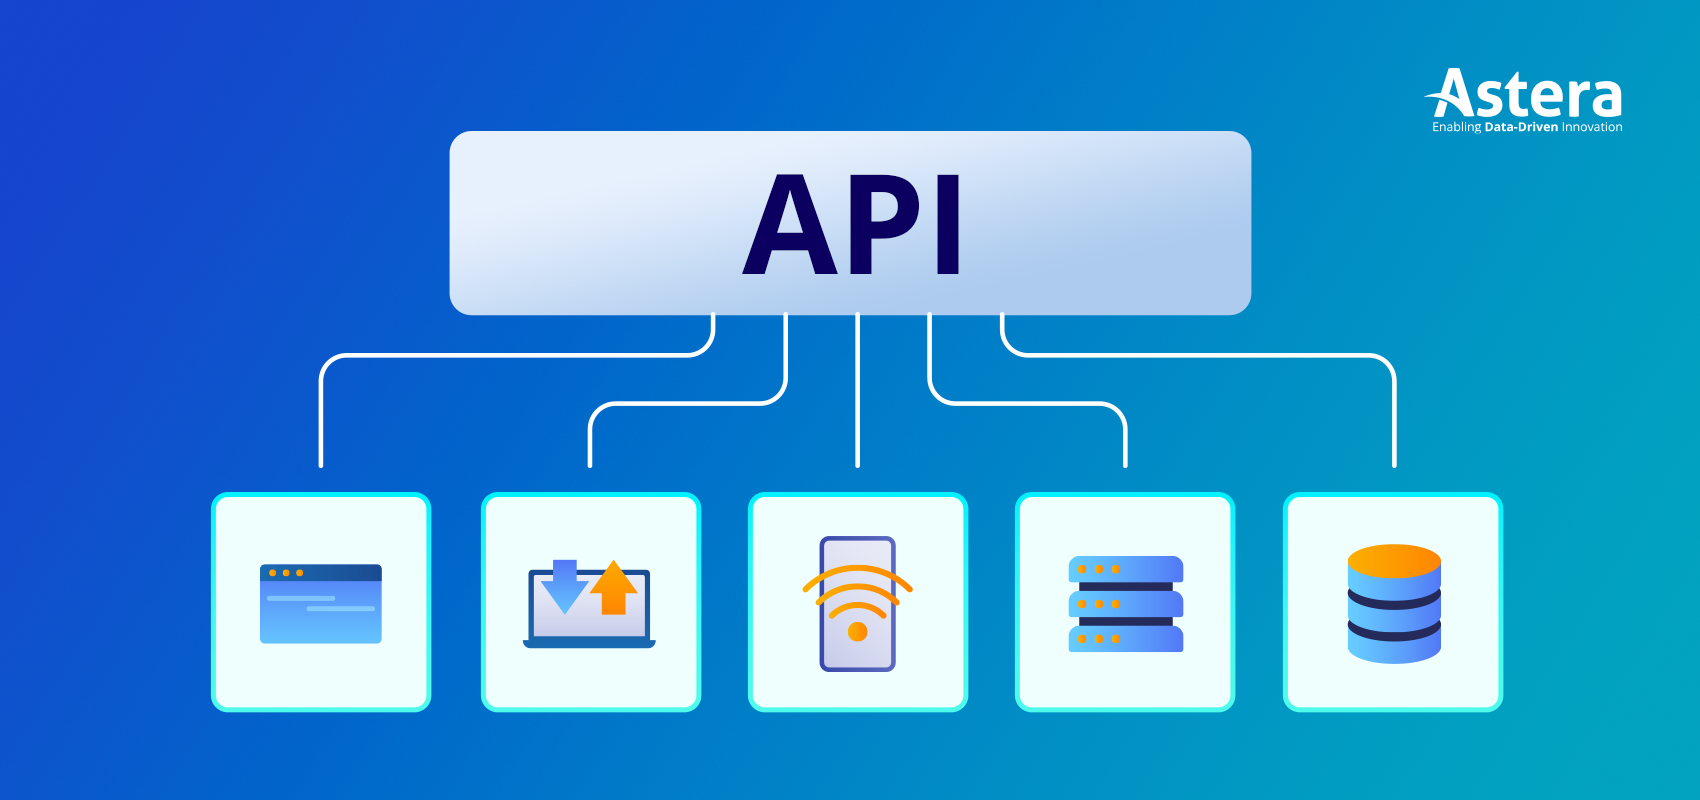 What does API stand for